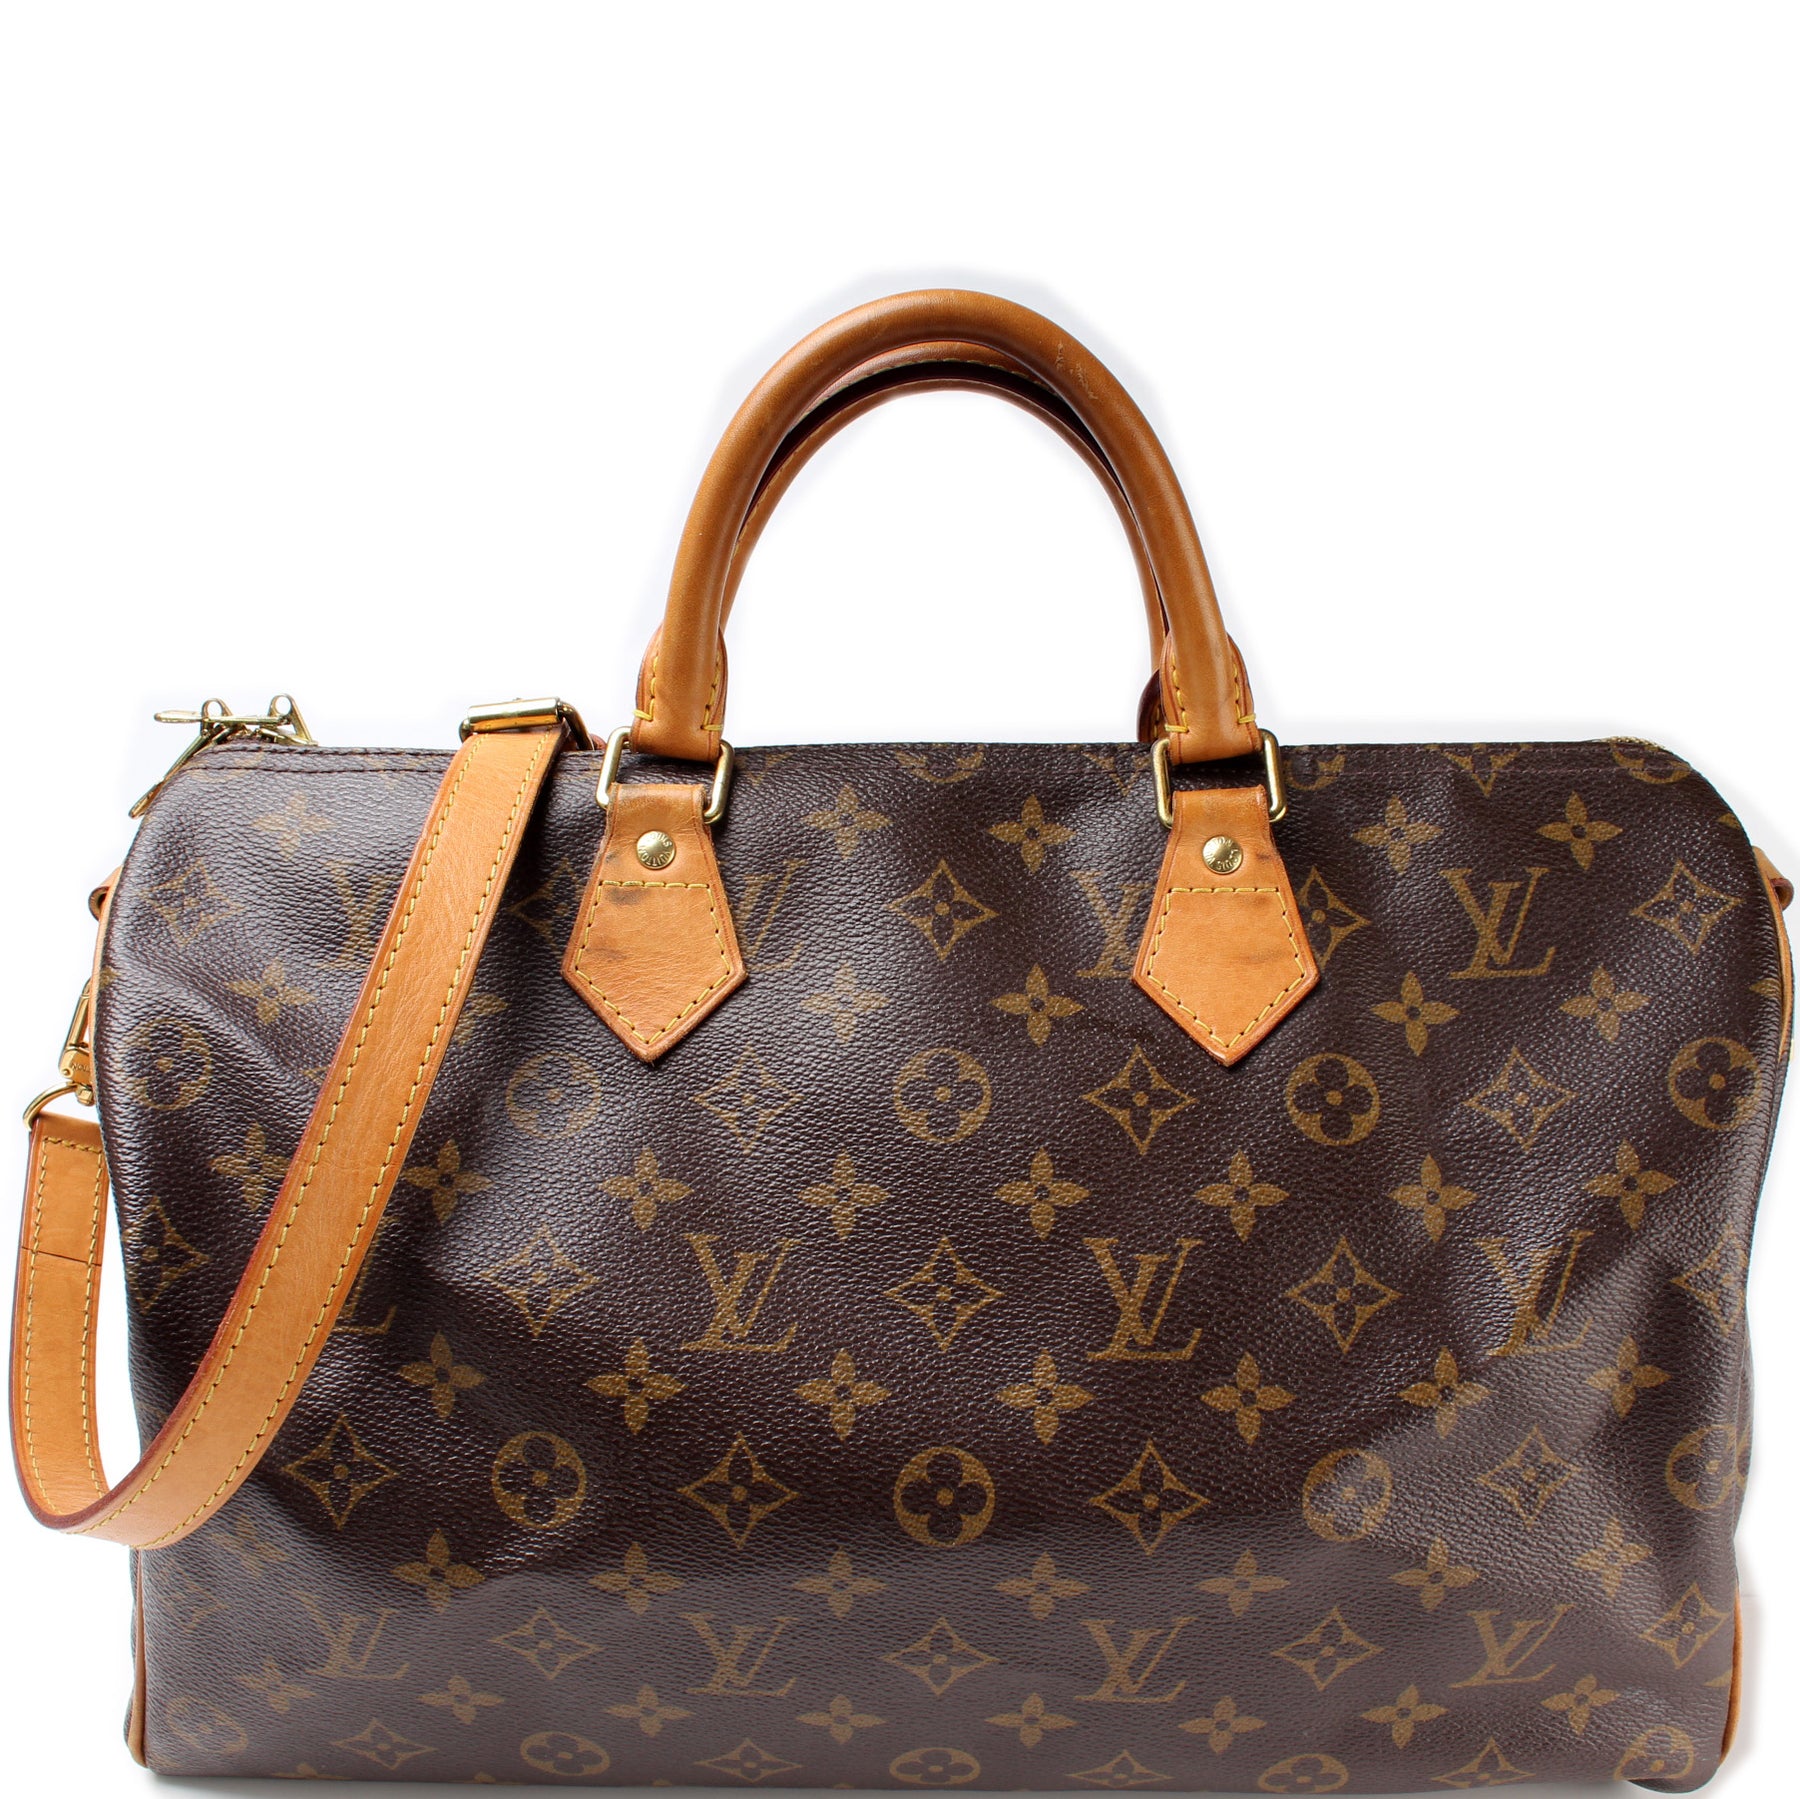 Louis Vuitton 2013 pre-owned Speedy 35 Bandouliere bag